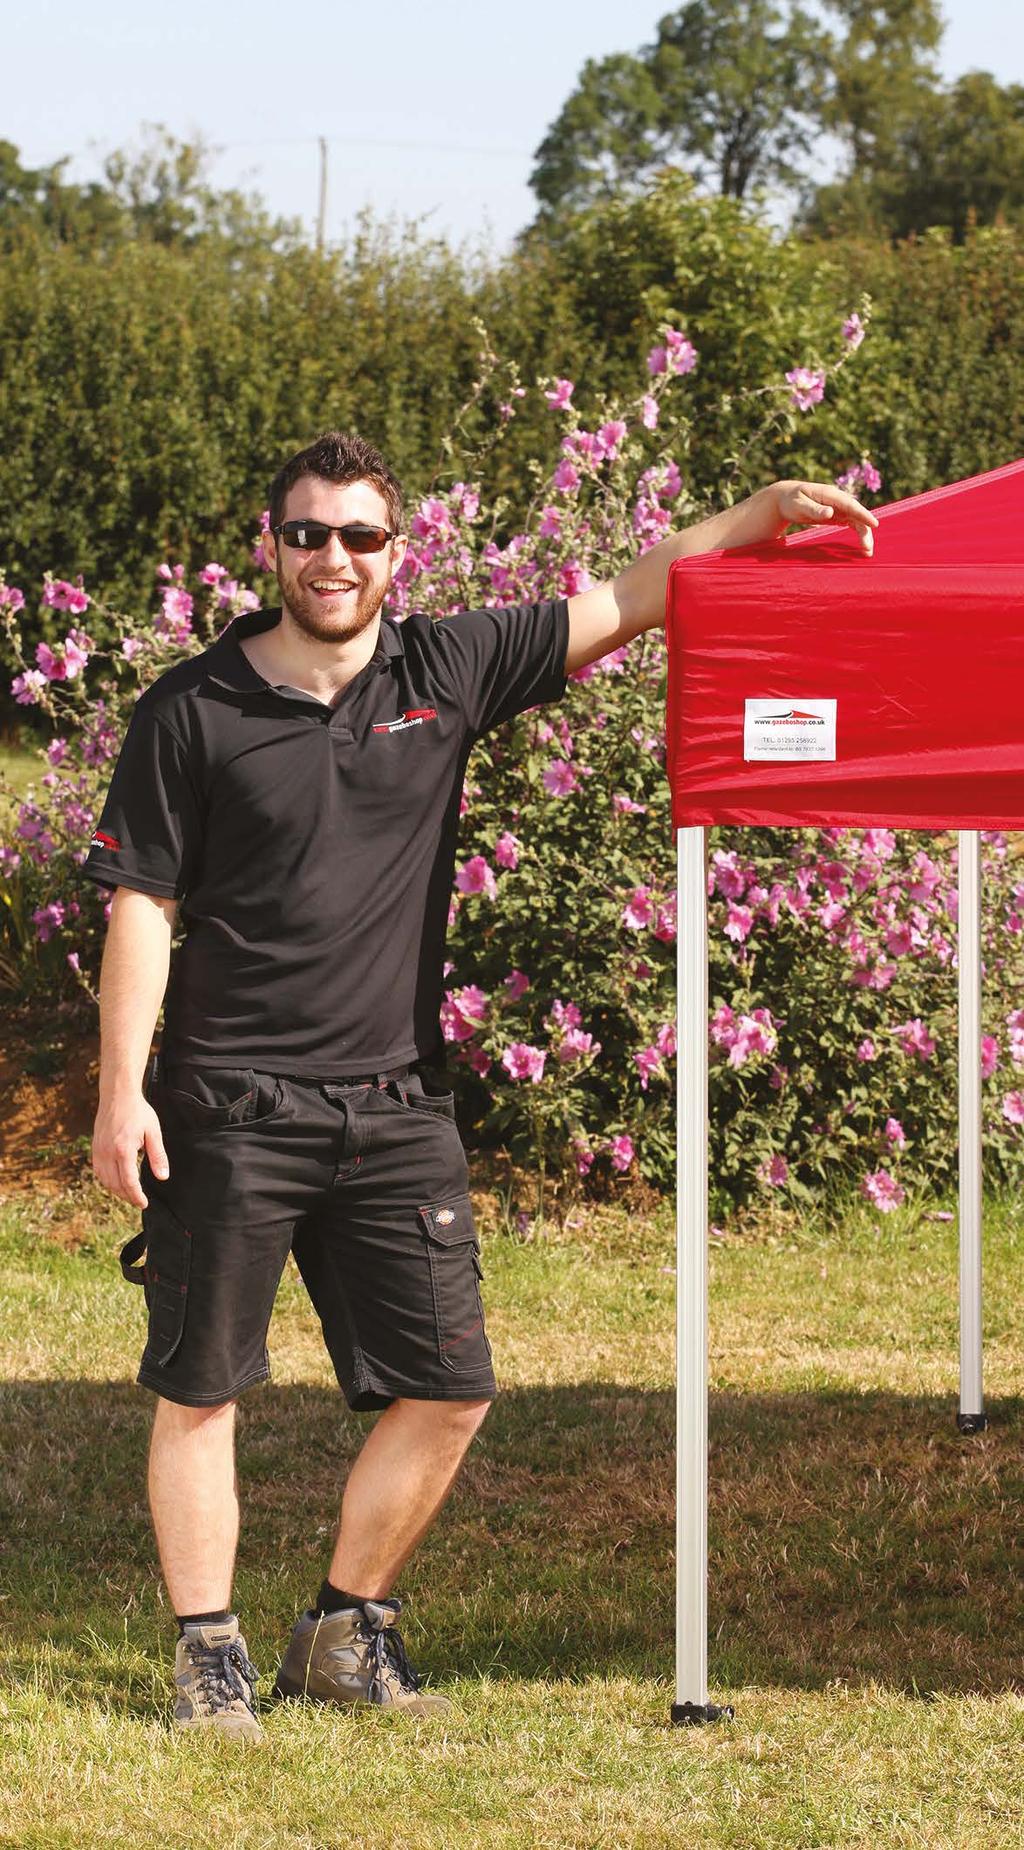 So whether you require a heavy duty, commercial grade pop up gazebo or a lightweight, portable instant shelter we are here to help you find a solution to suit your requirements.